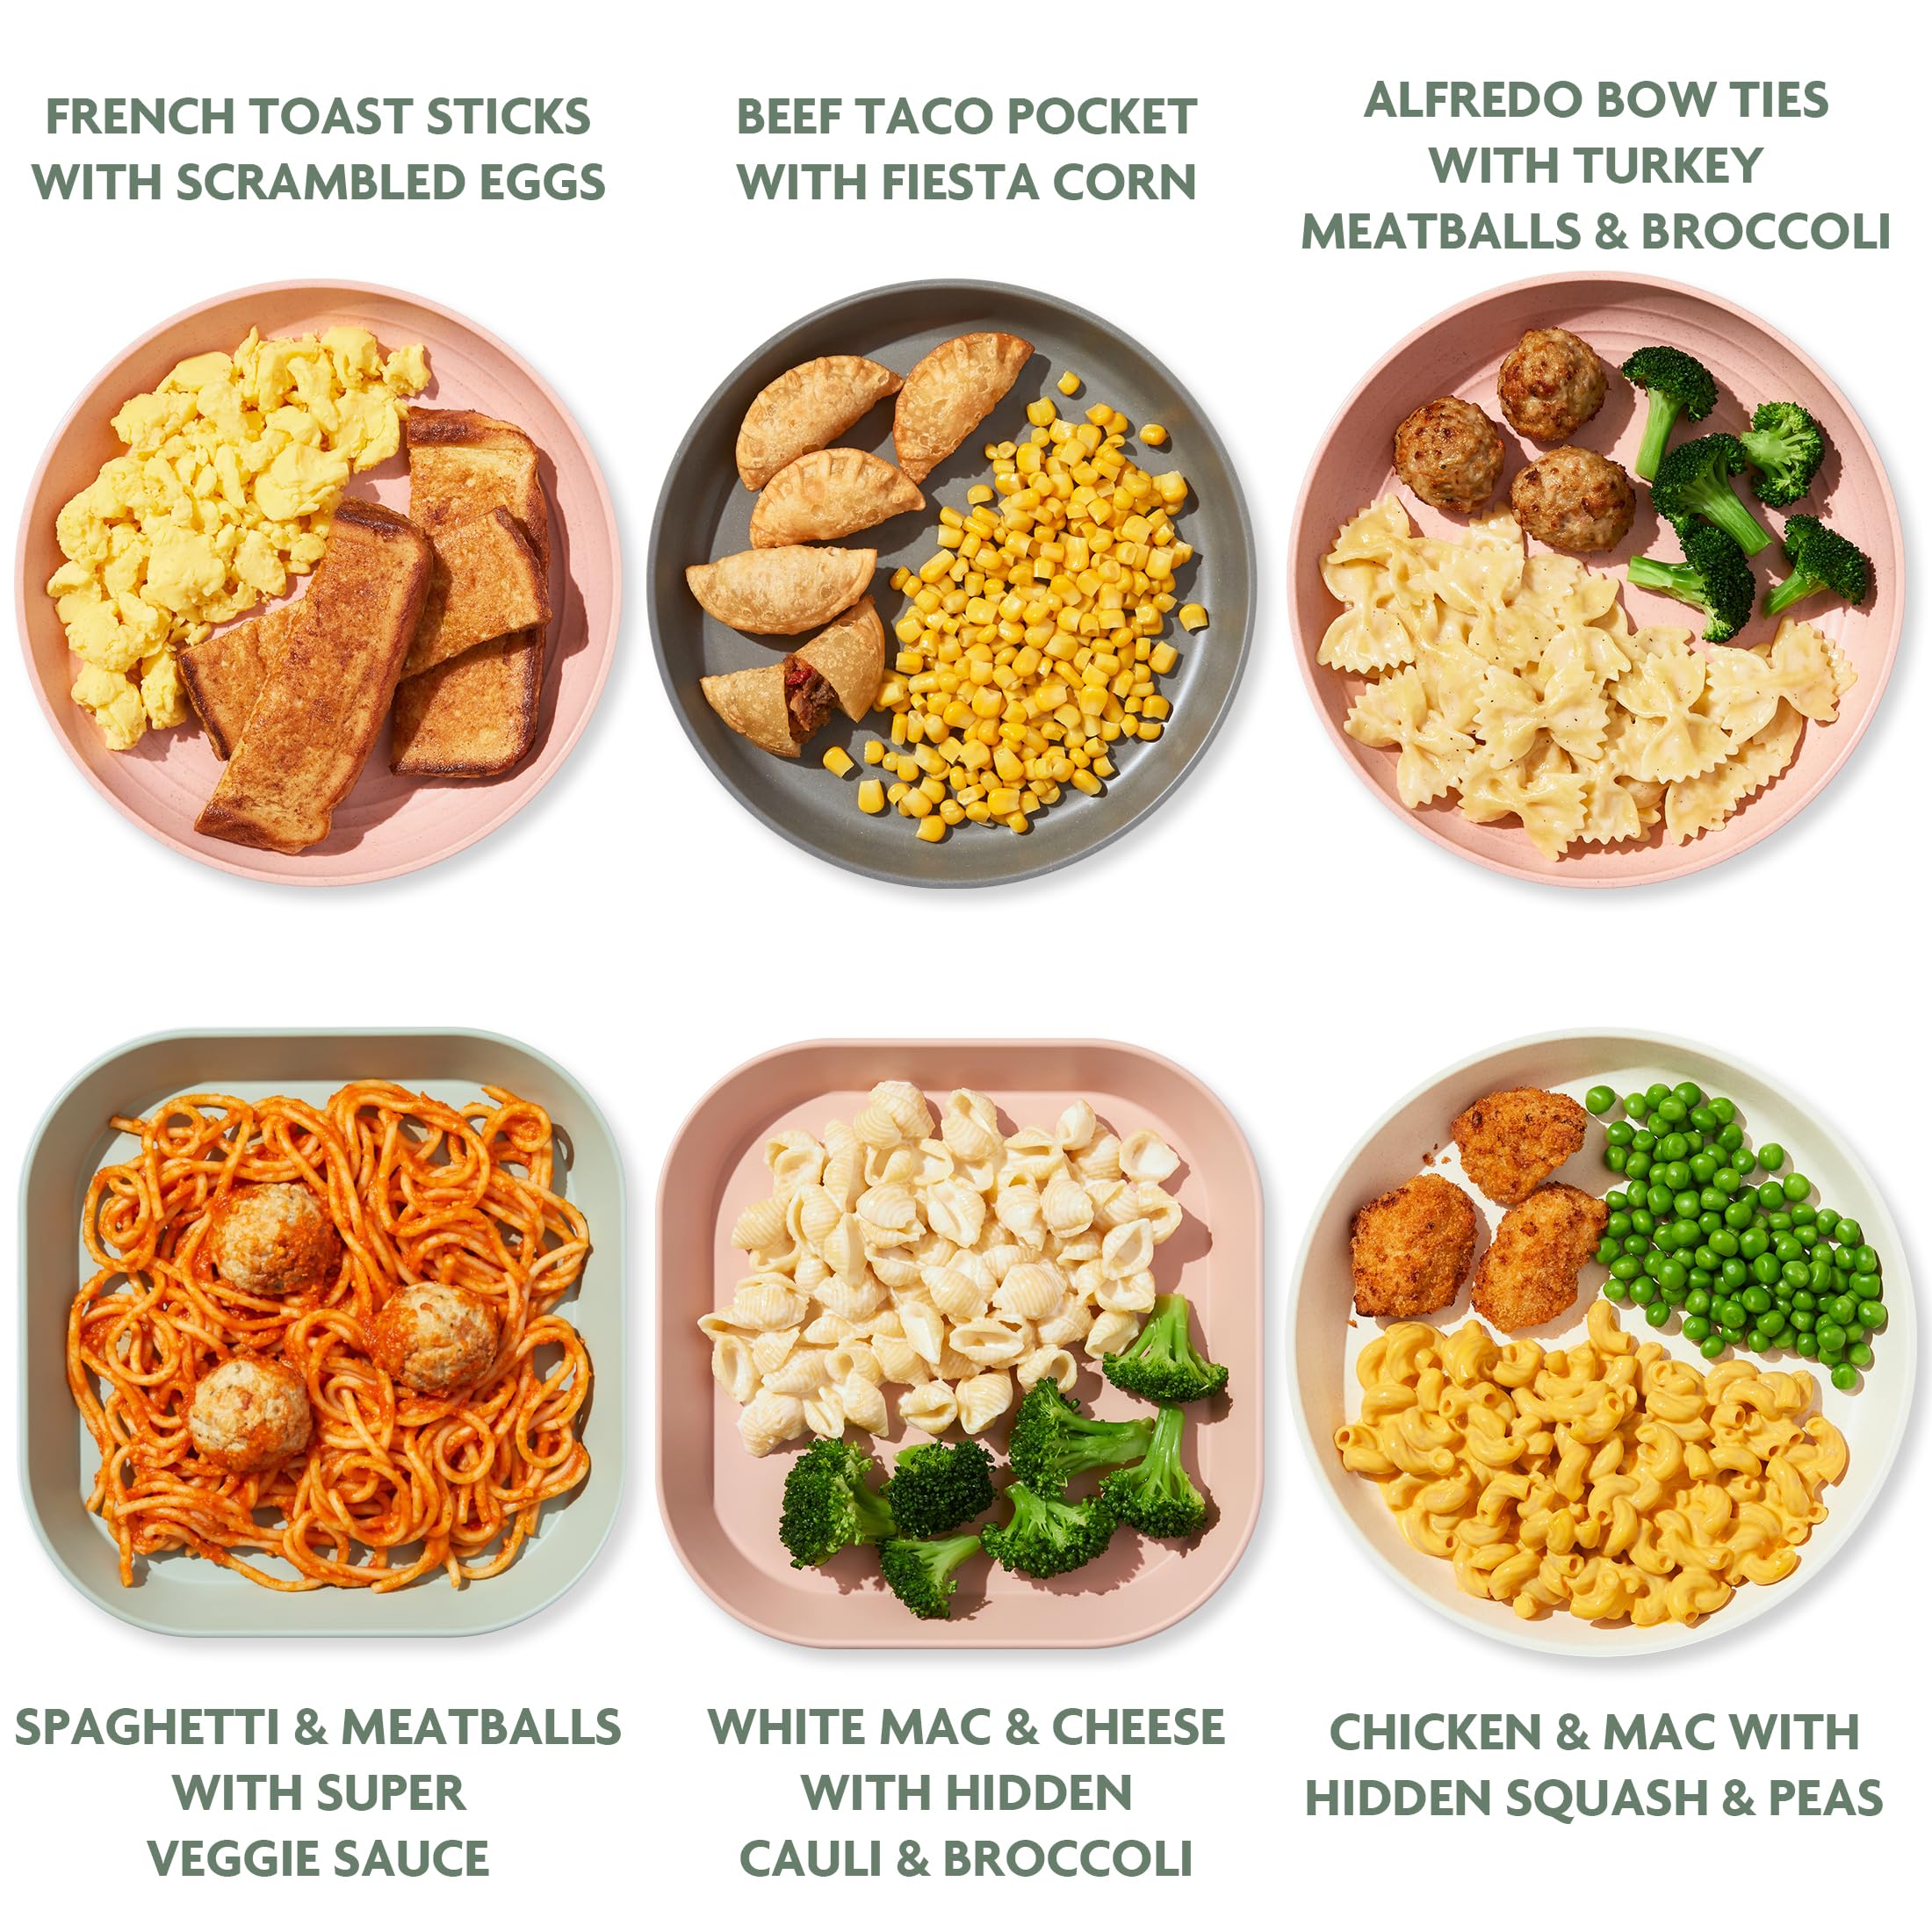 Nurture Life Healthy Toddler & Kid Food Favorites 6-Meal Variety Pack (French Toast & Chicken Nuggets), Organic Focus